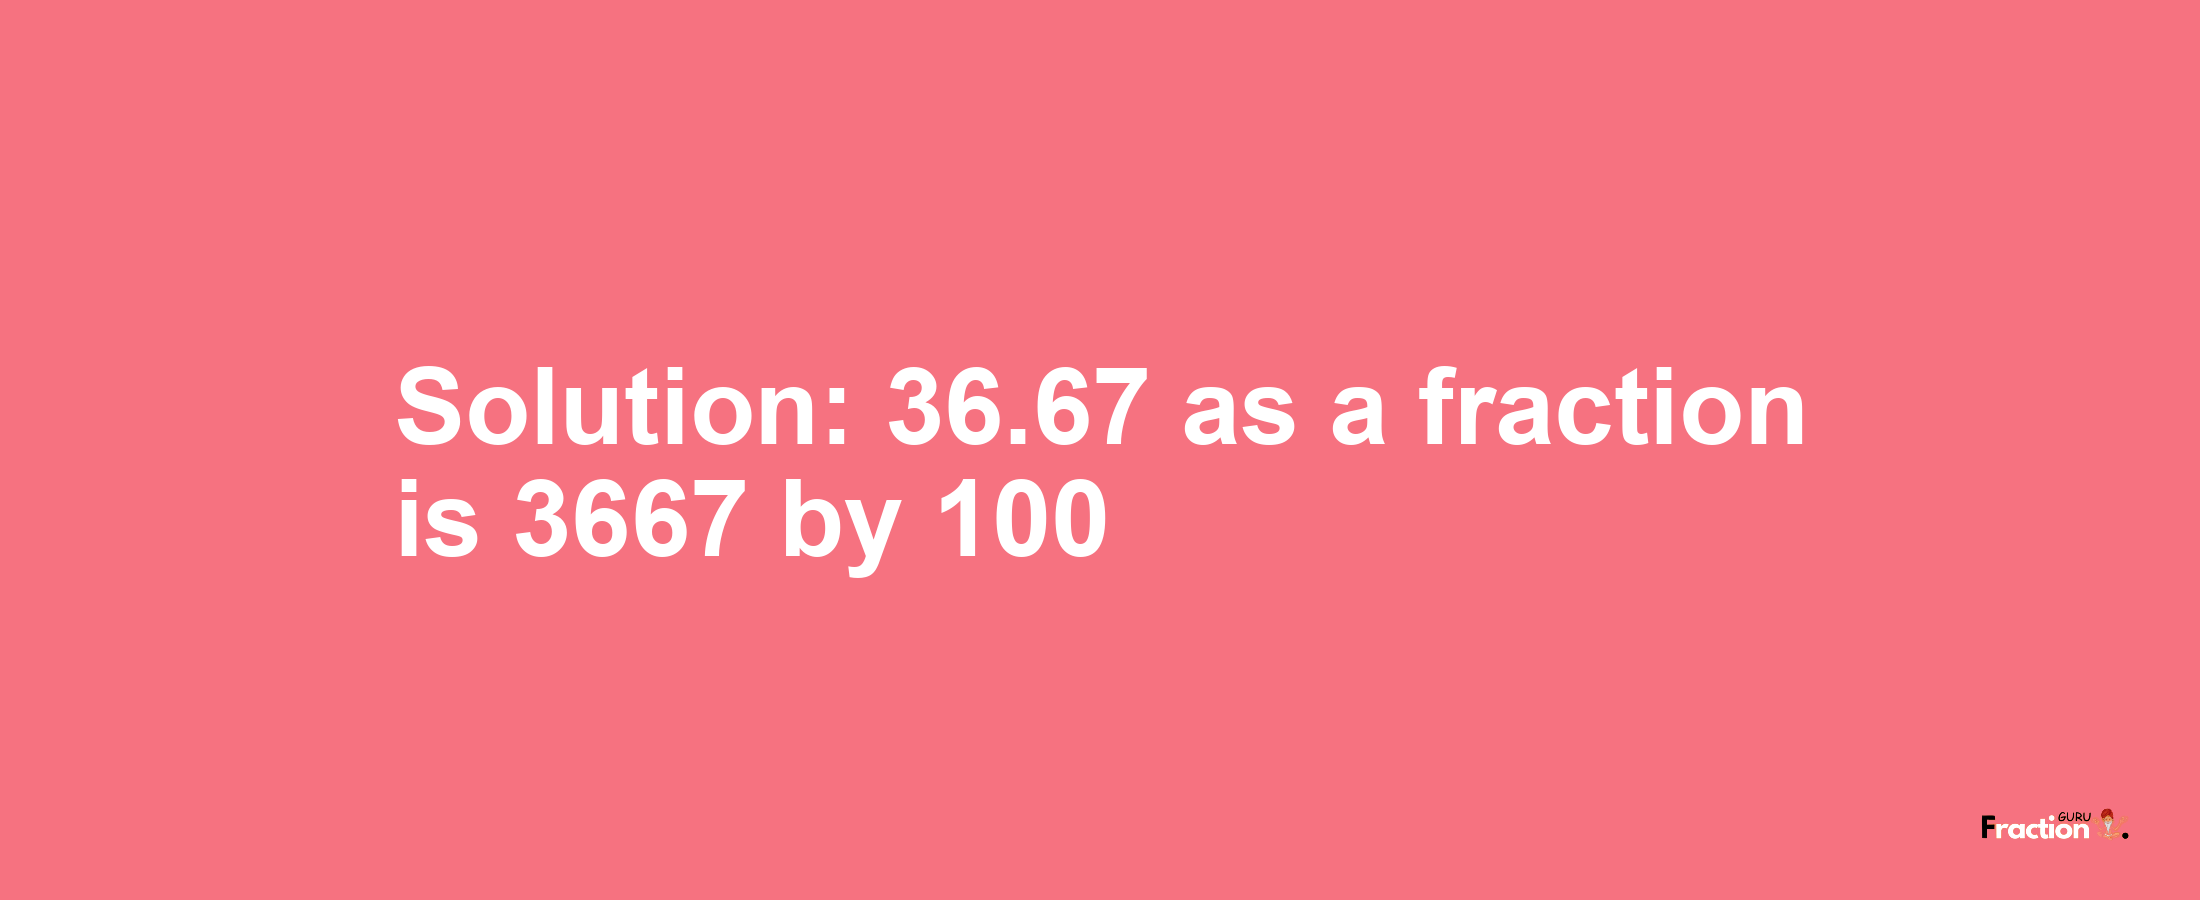 Solution:36.67 as a fraction is 3667/100